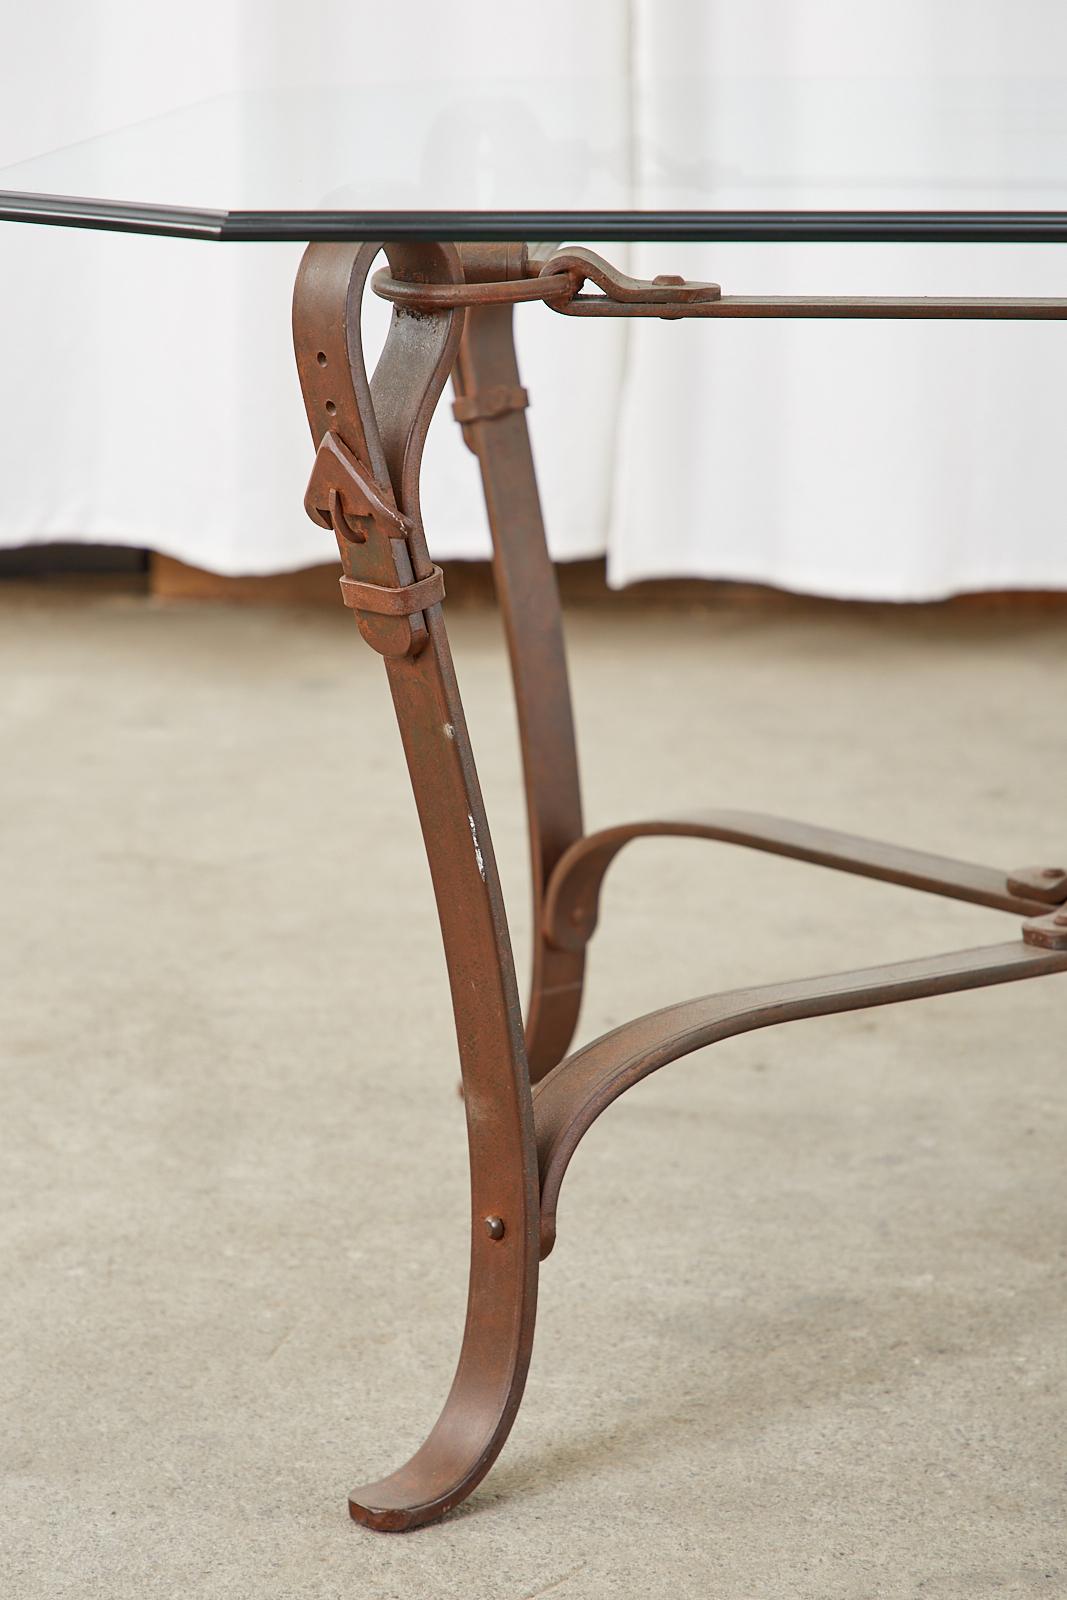 Adnet Hermes Style Faux Leather Iron Strap Cocktail Table In Good Condition For Sale In Rio Vista, CA